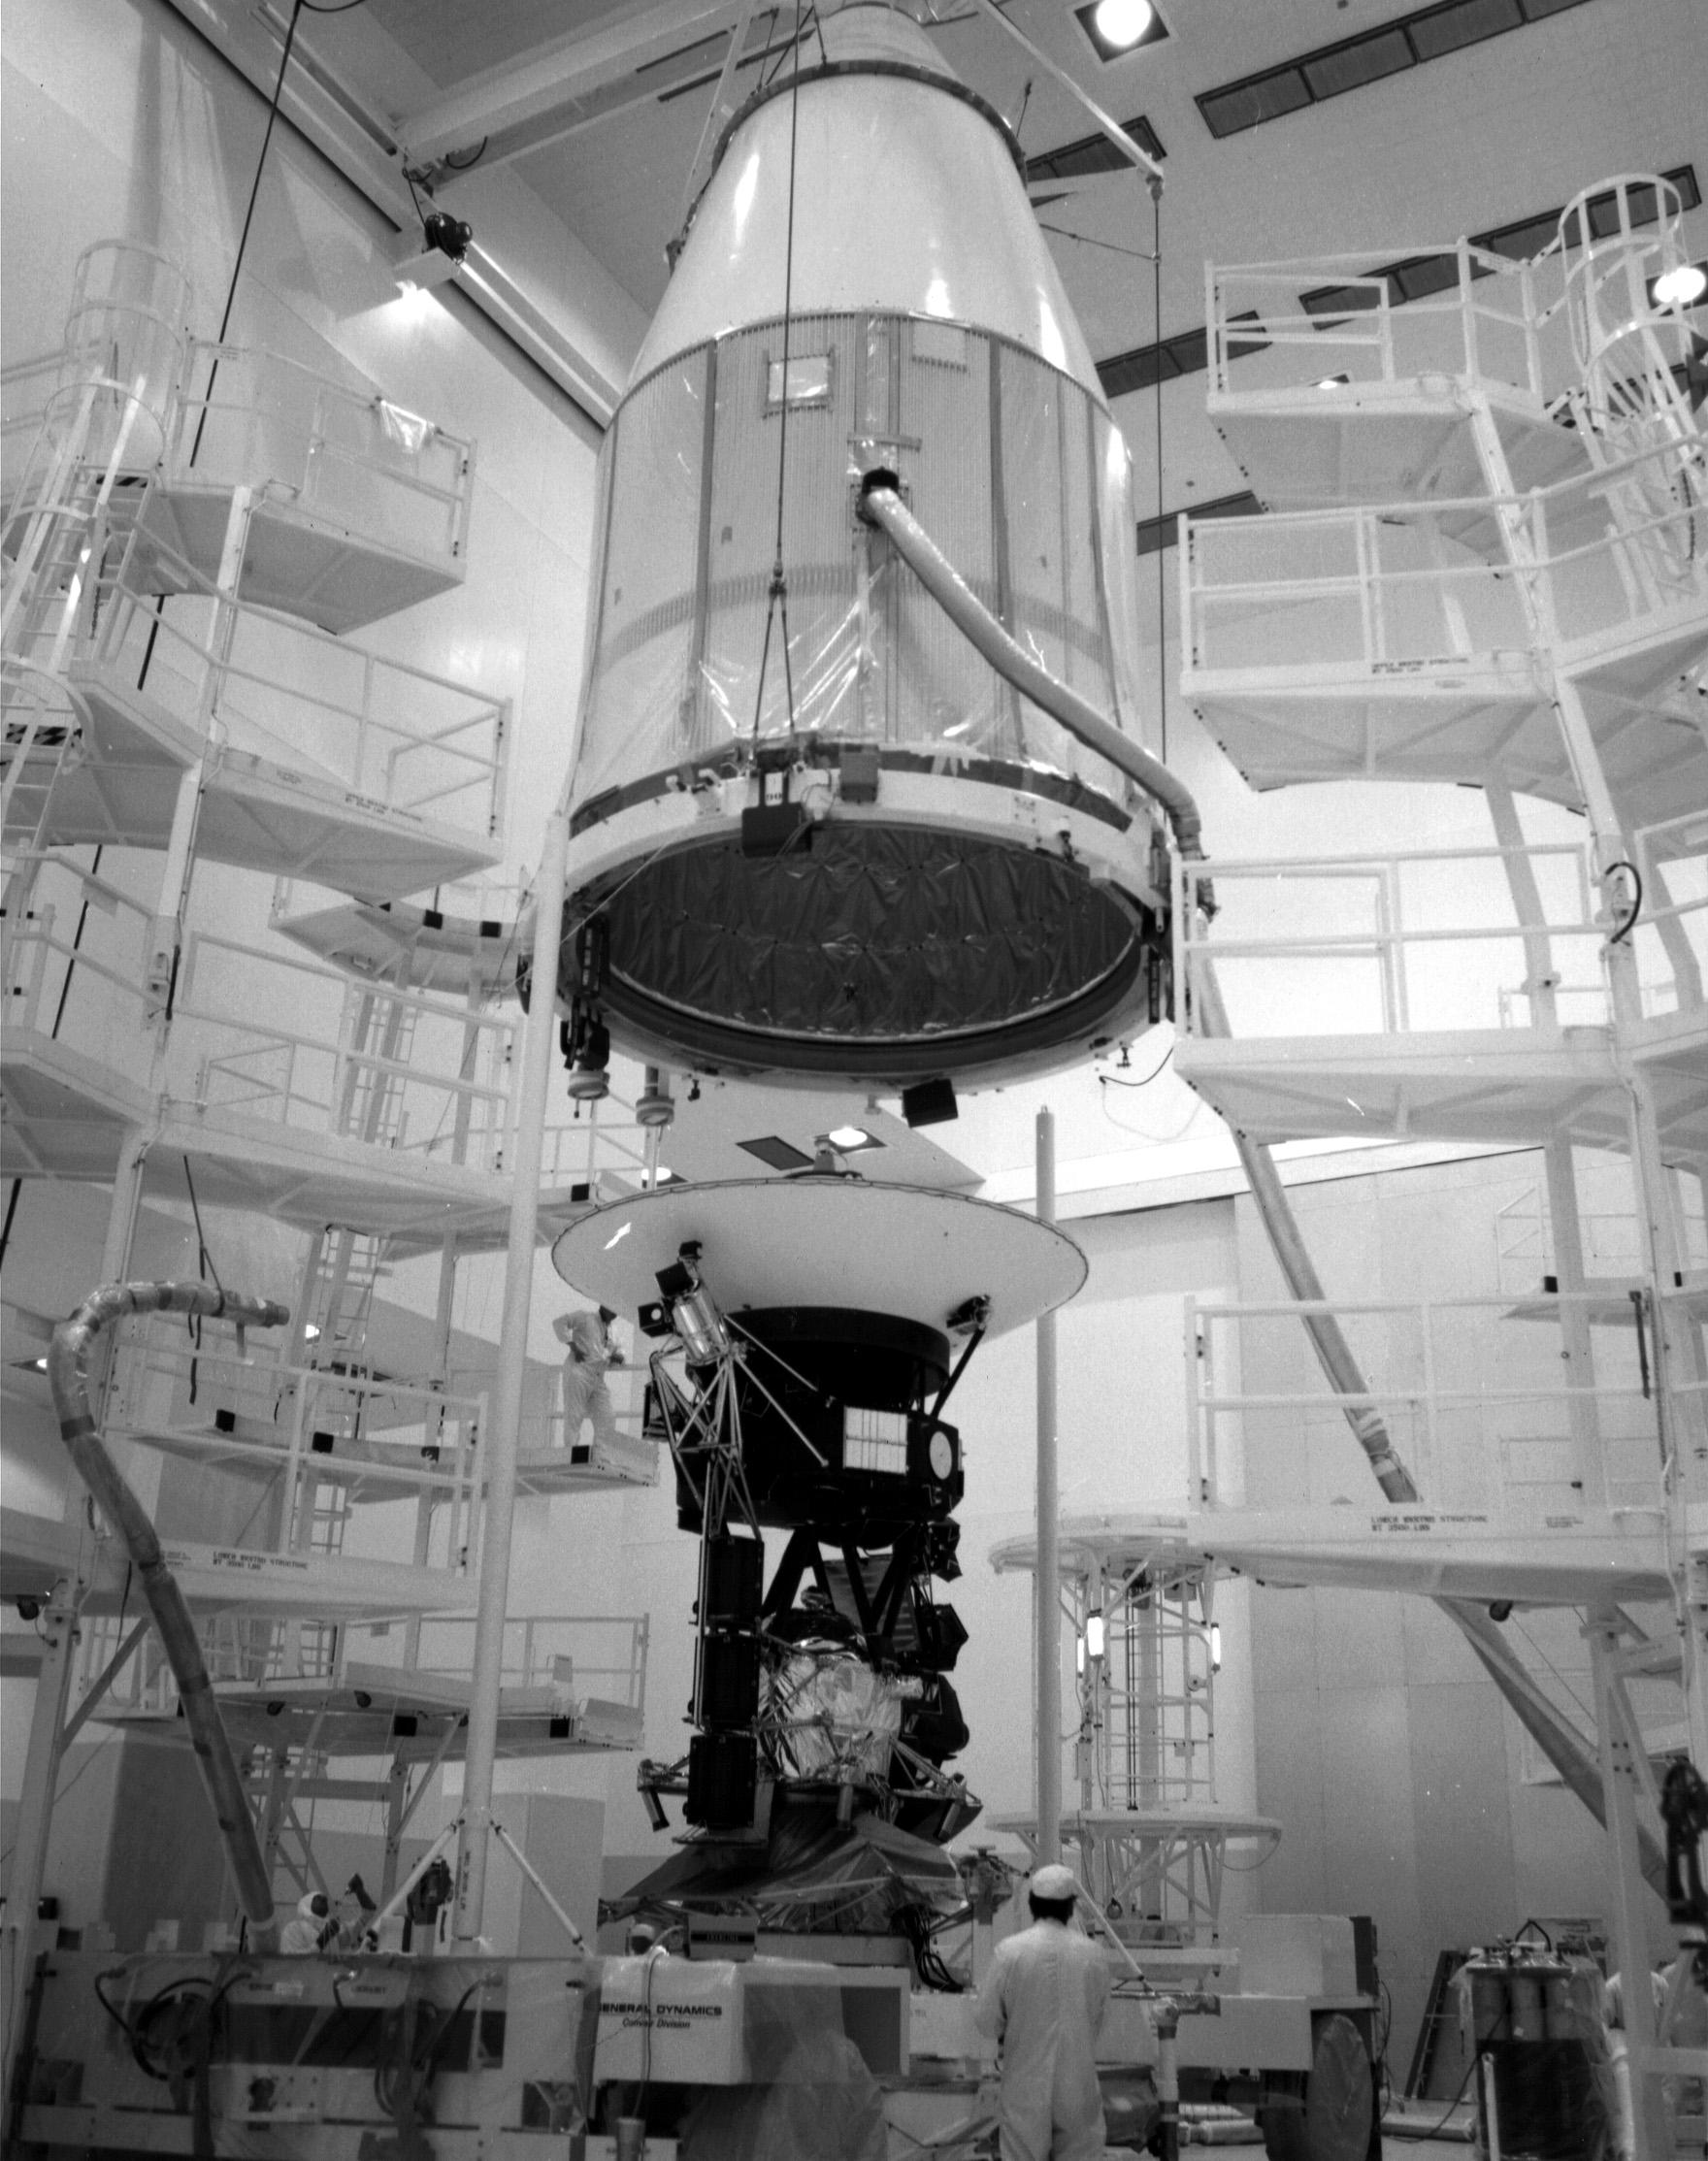 The Voyager 2 spacecraft, which was the first of the two Voyagers to launch, is seen at the Spacecraft Assembly and Encapsulation Facility-1 at NASA's Kennedy Space Center in Cape Canaveral, Florida. This archival photo is from August 1977. The spacecraft was put into this shroud on August 2, 1977, to protect it during flight through the atmosphere.